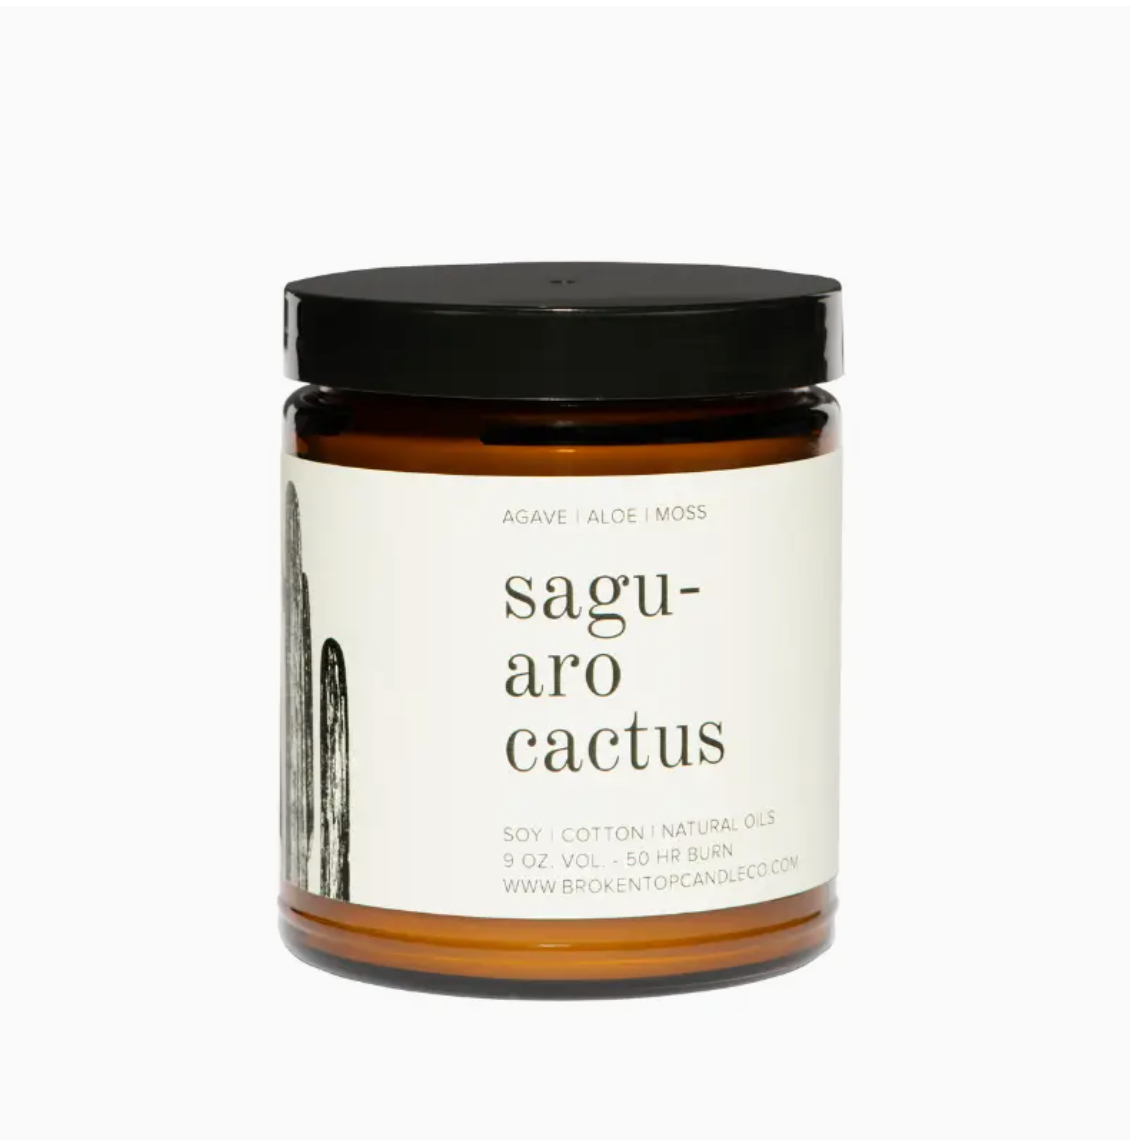 A Faire soy candle in a glass jar labeled &quot;saguaro cactus&quot; with &quot;agave, aloe, moss&quot; written beneath. The jar is brown with a black lid and the label includes an illustration of a cactus.